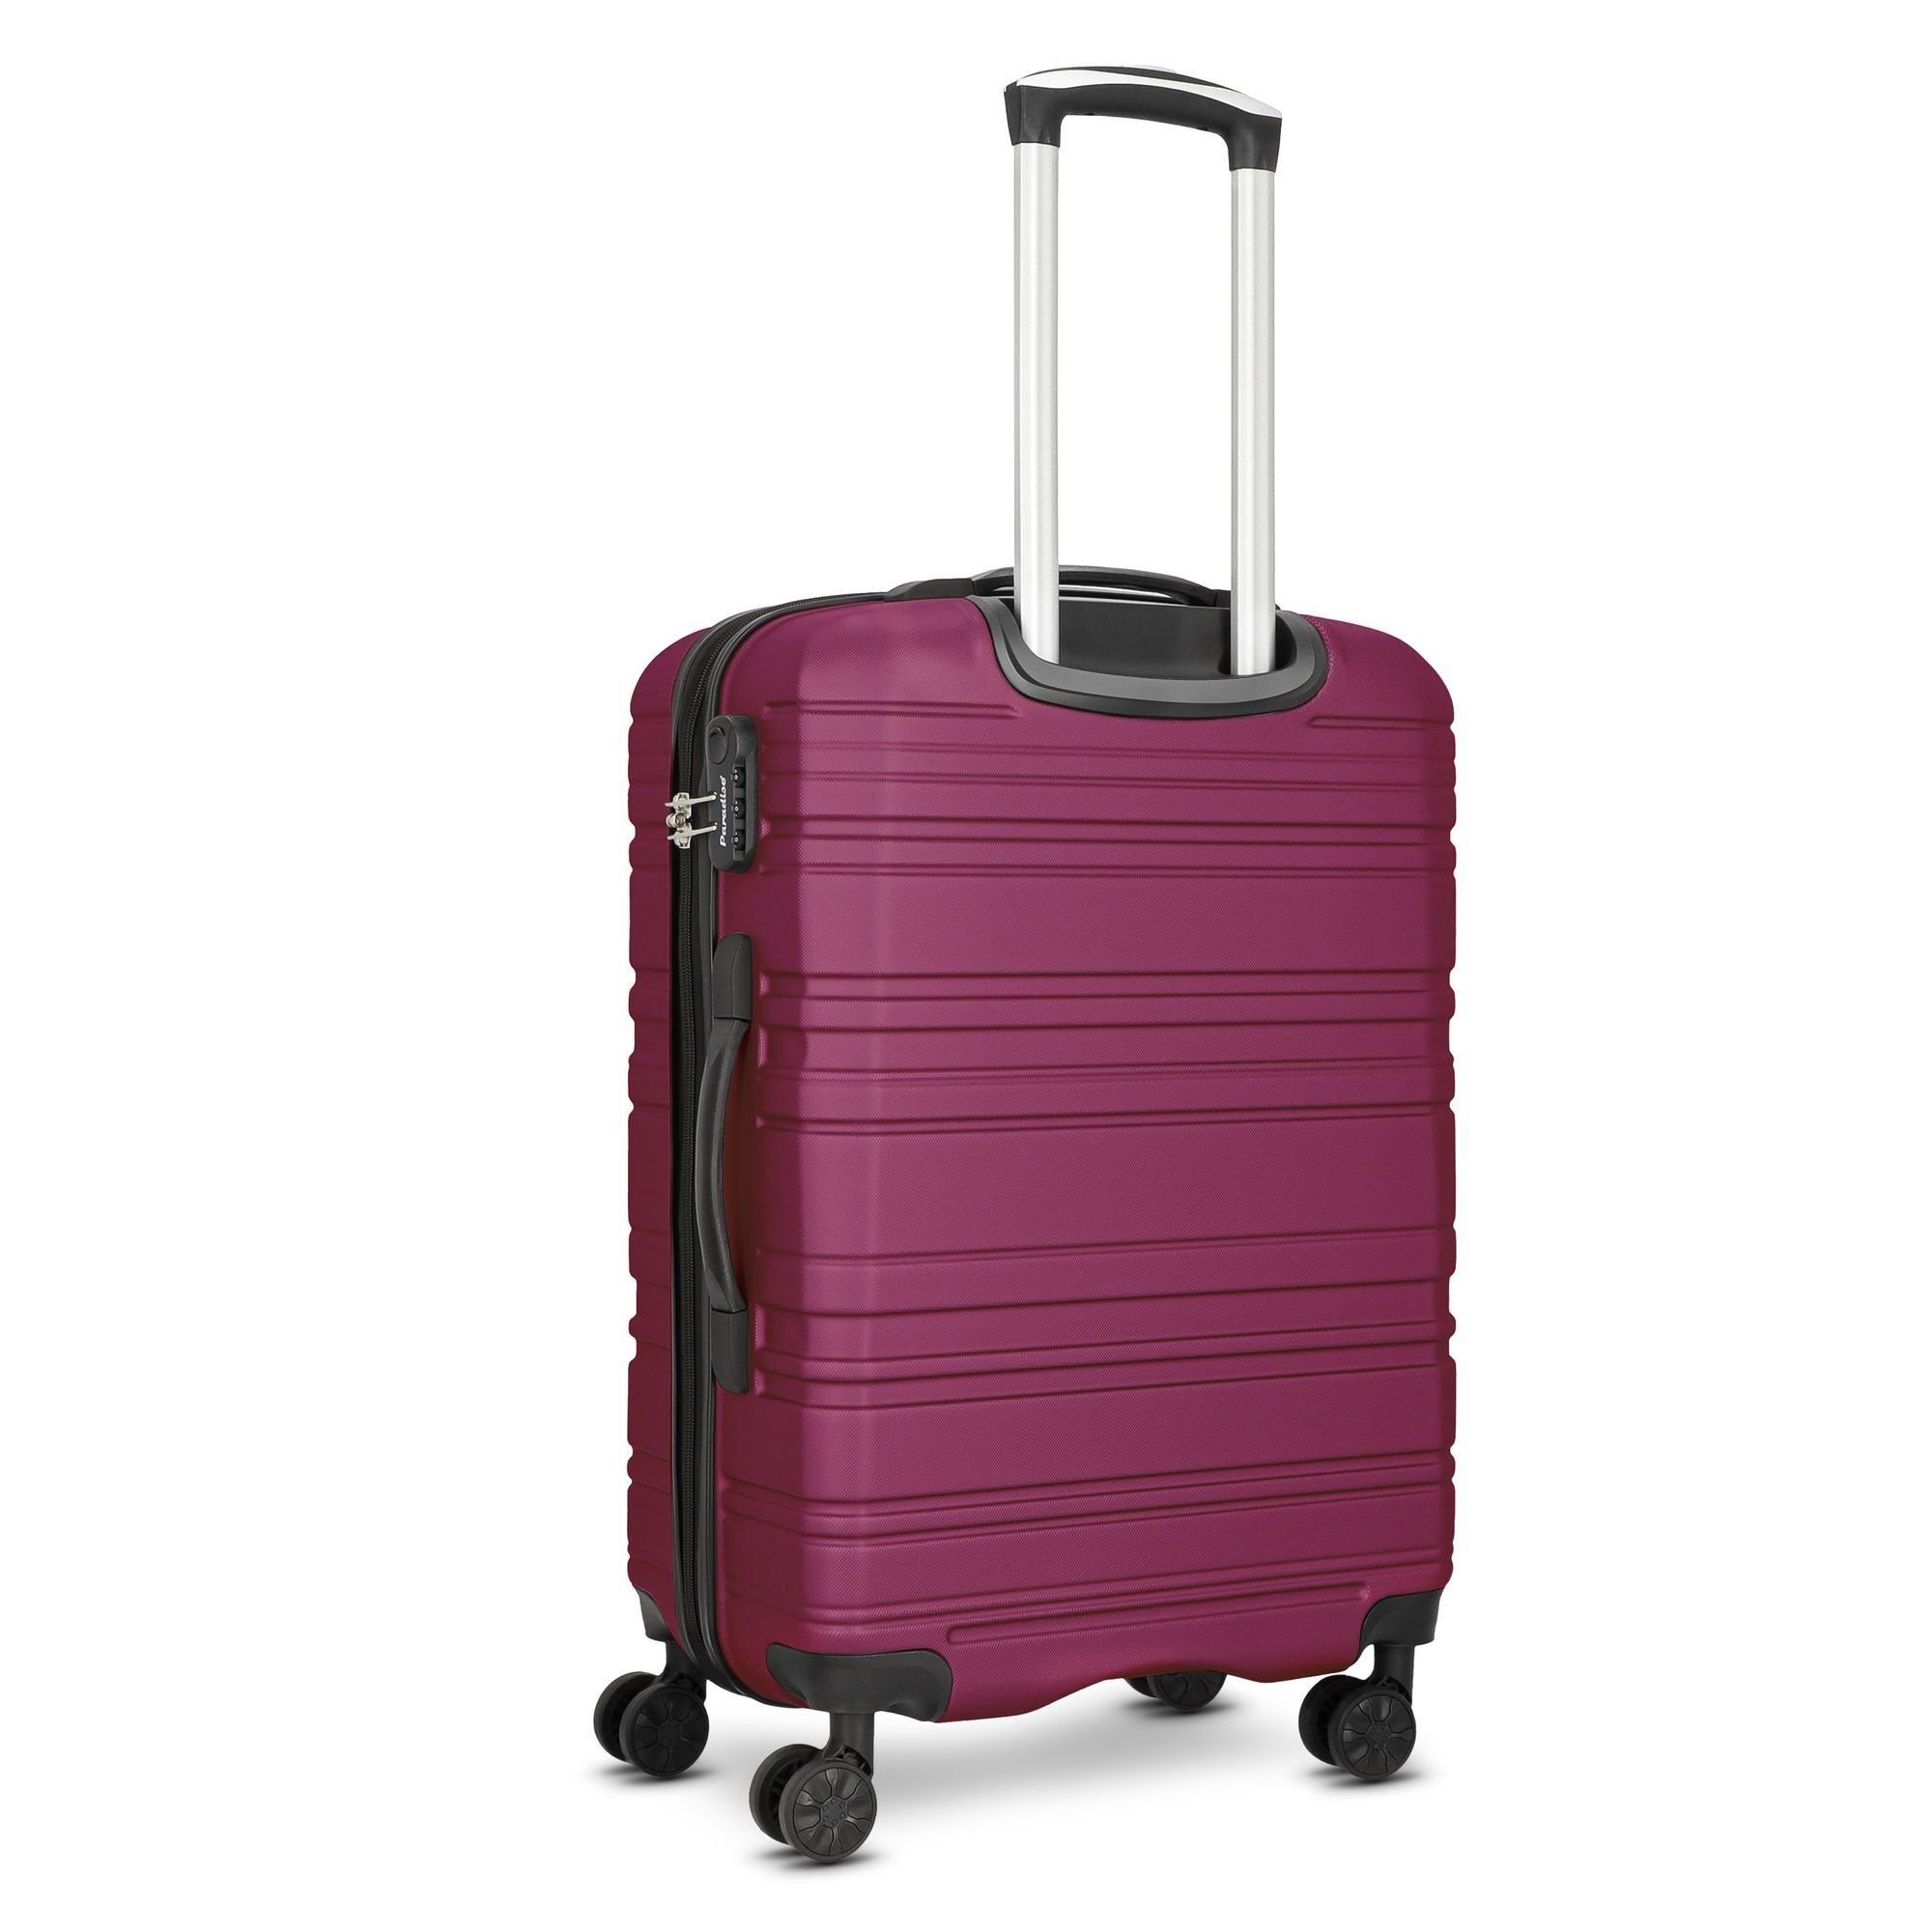 tlg), Trolleyset 4 3 berry Rollen, ABS (3-teilig, CHECK.IN® Paradise,